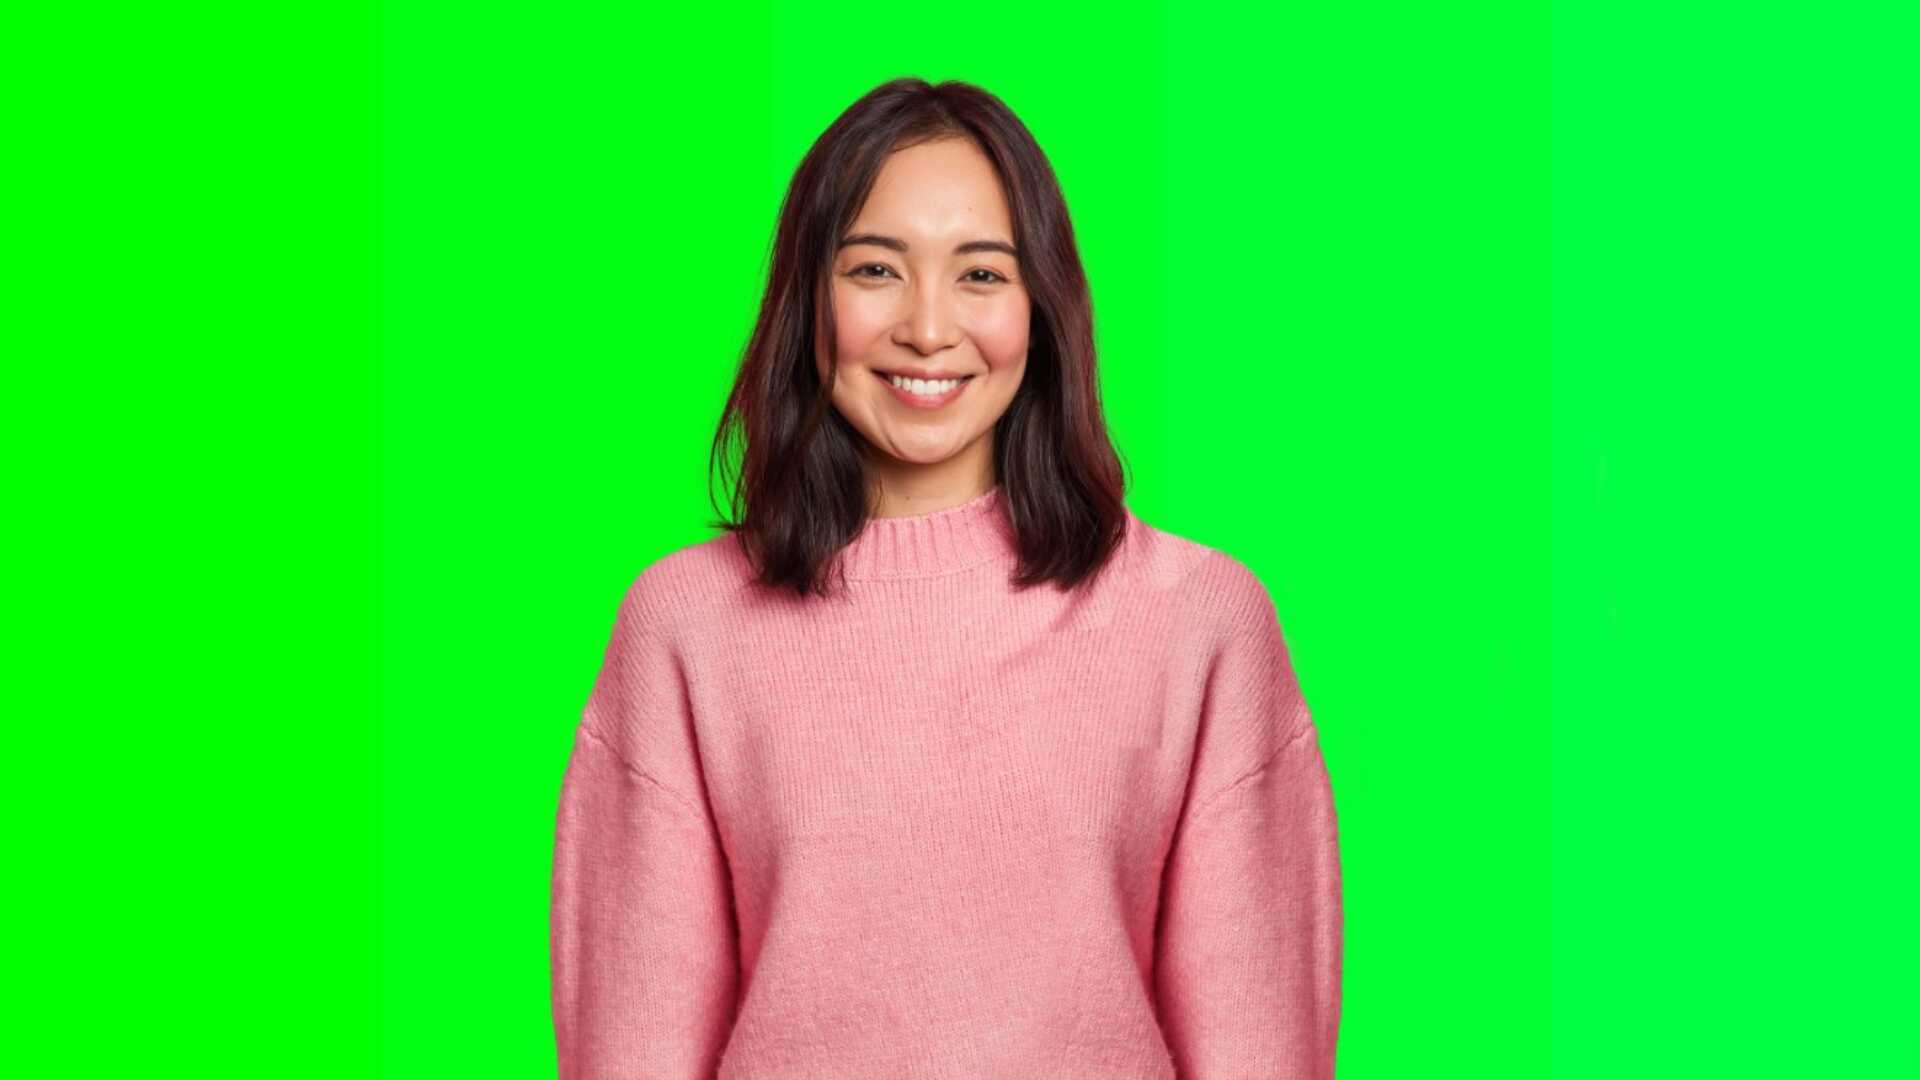 Creative Backgrounds with Green Screen